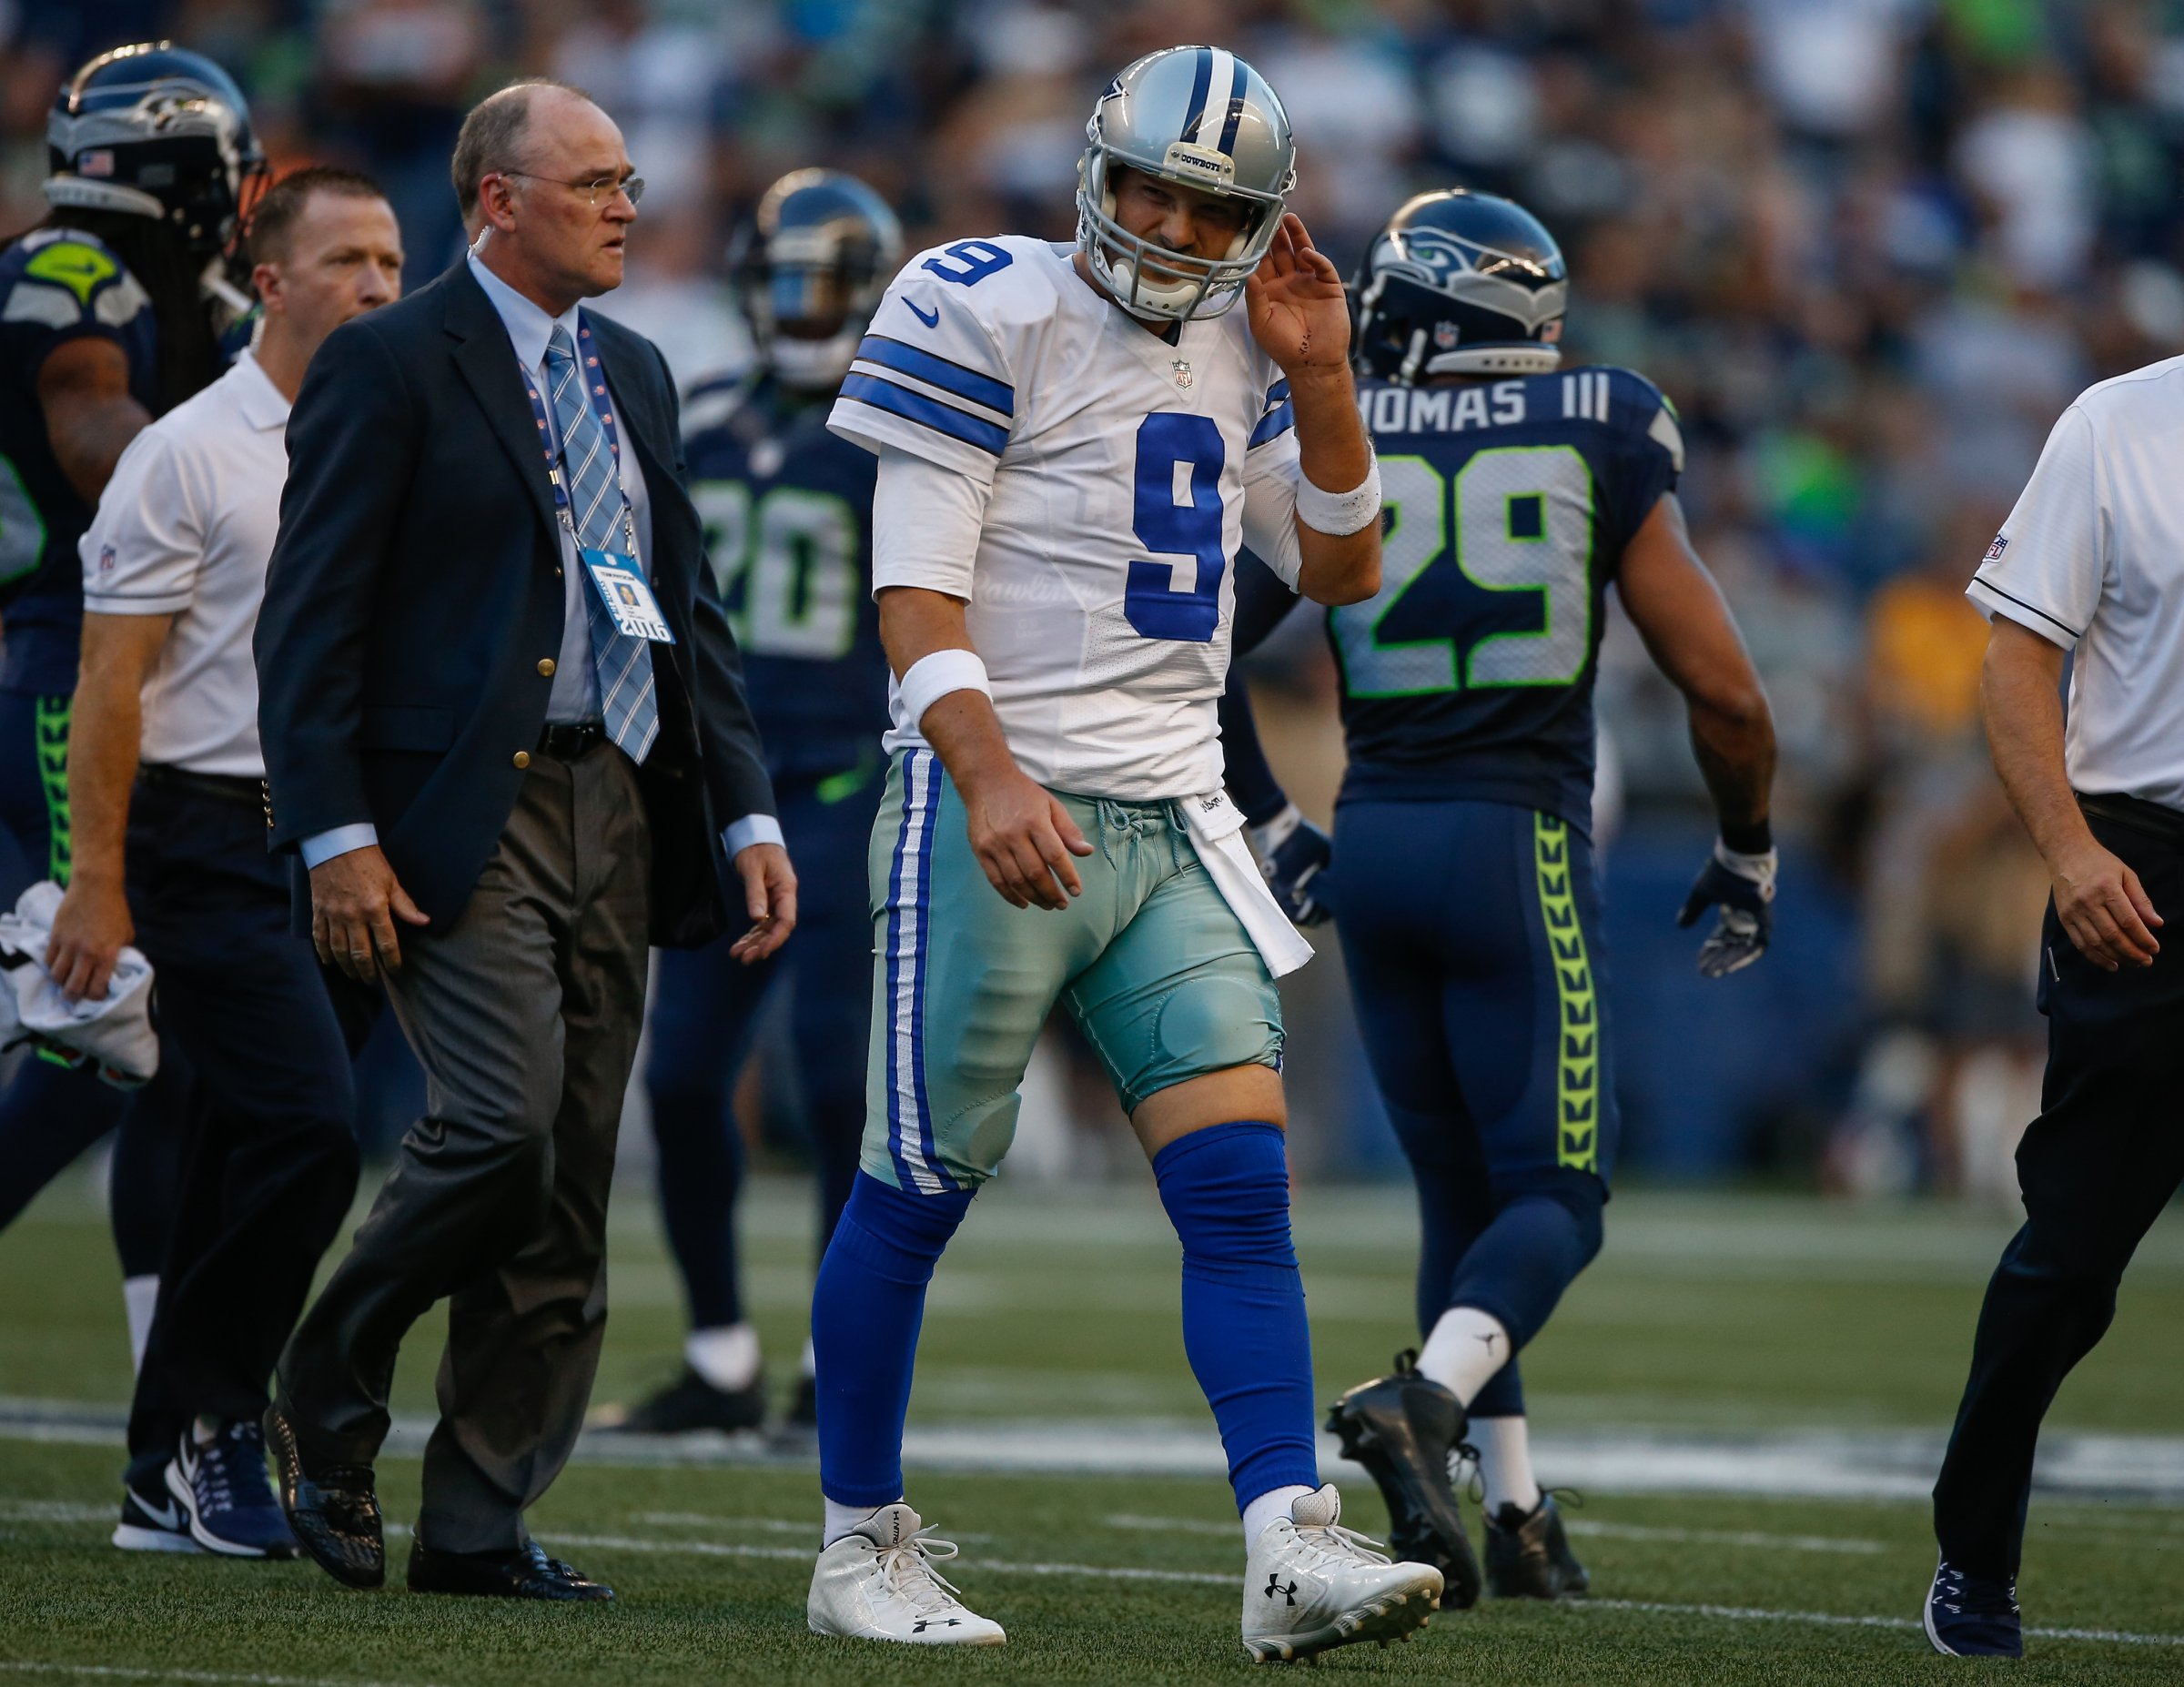 Quarterback Tony Romo of the Dallas Cowboys leaves the field after being injured during a preseason game against the Seattle Seahawks in Seattle, Washington, on Aug. 25, 2016.